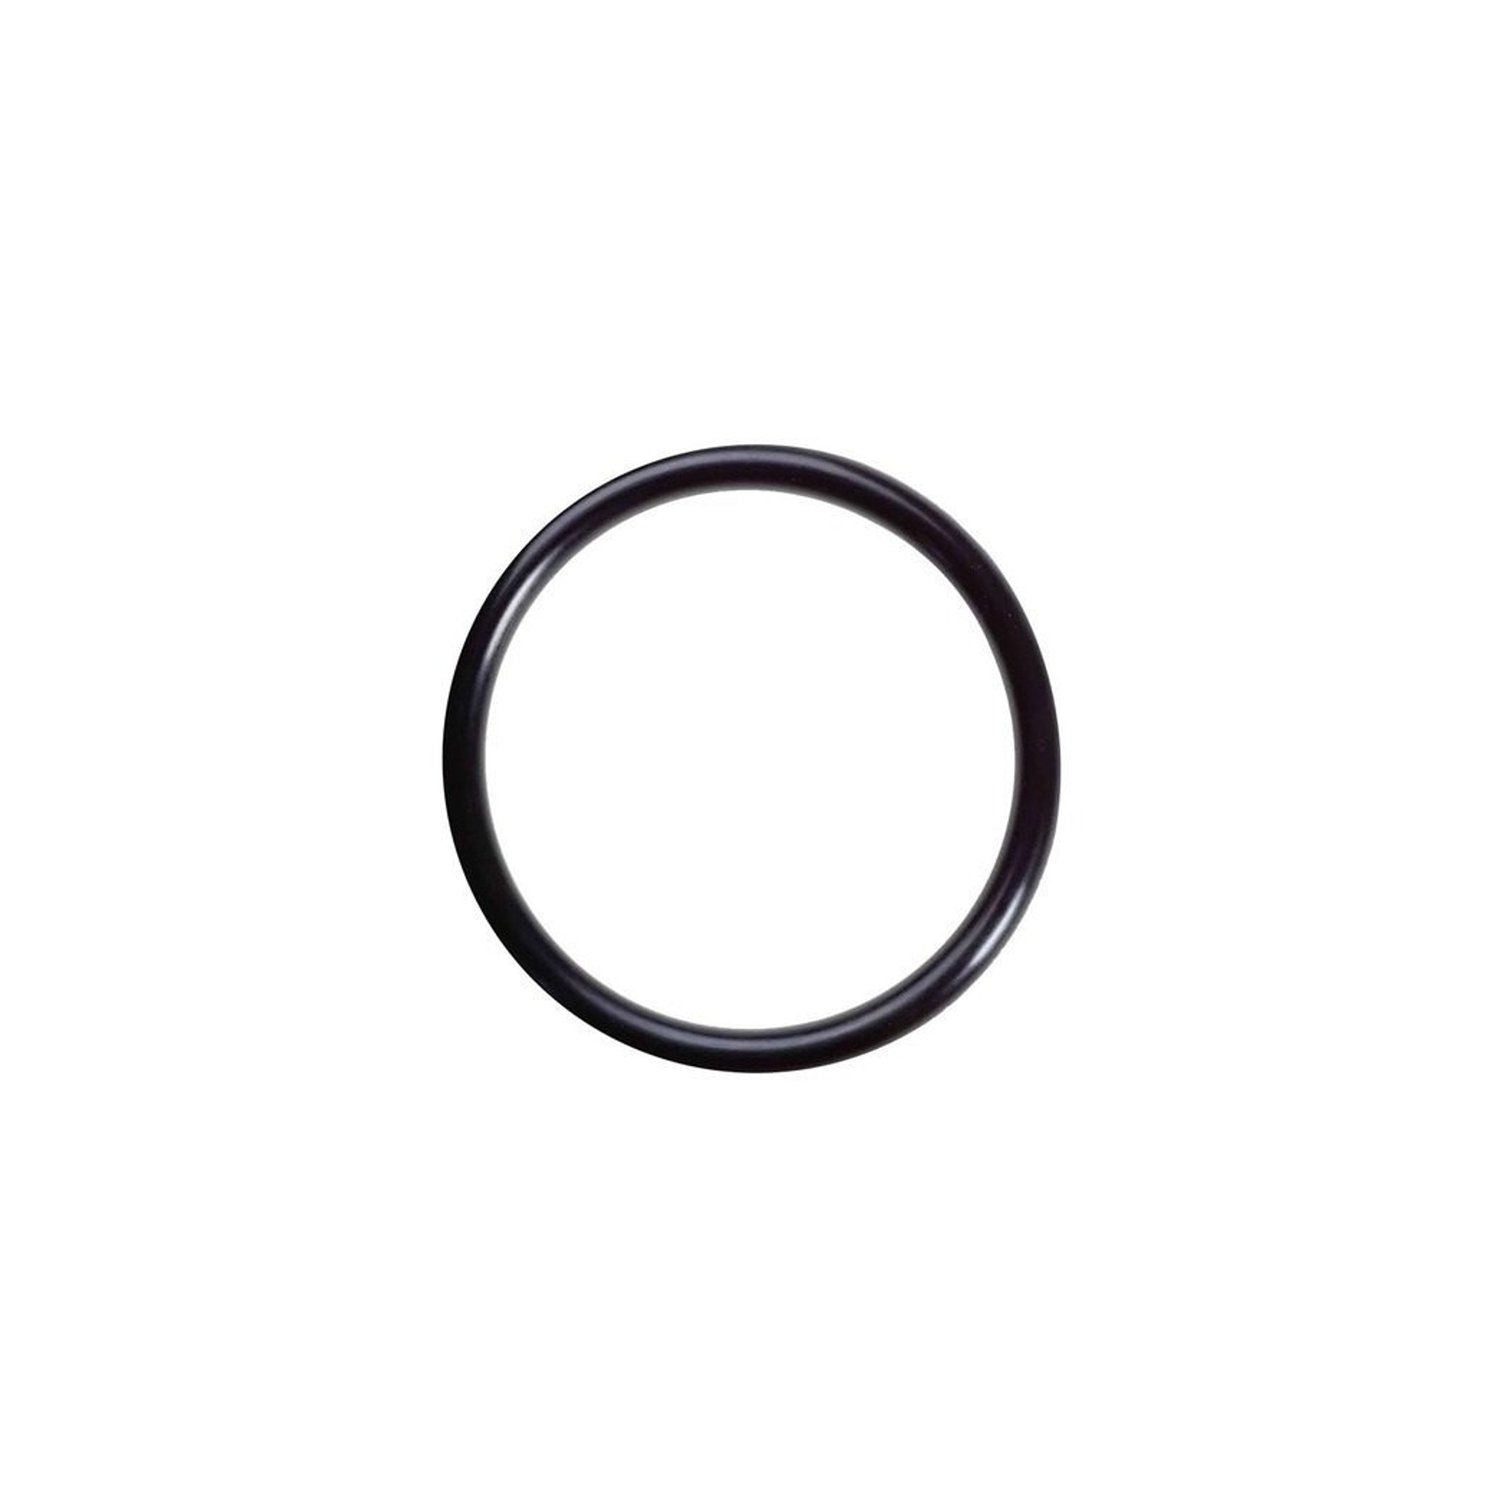 O-ringen 8.8 x 1,9 mm 1 st HNBR-rubber, voor airconditioning R12 & R134A